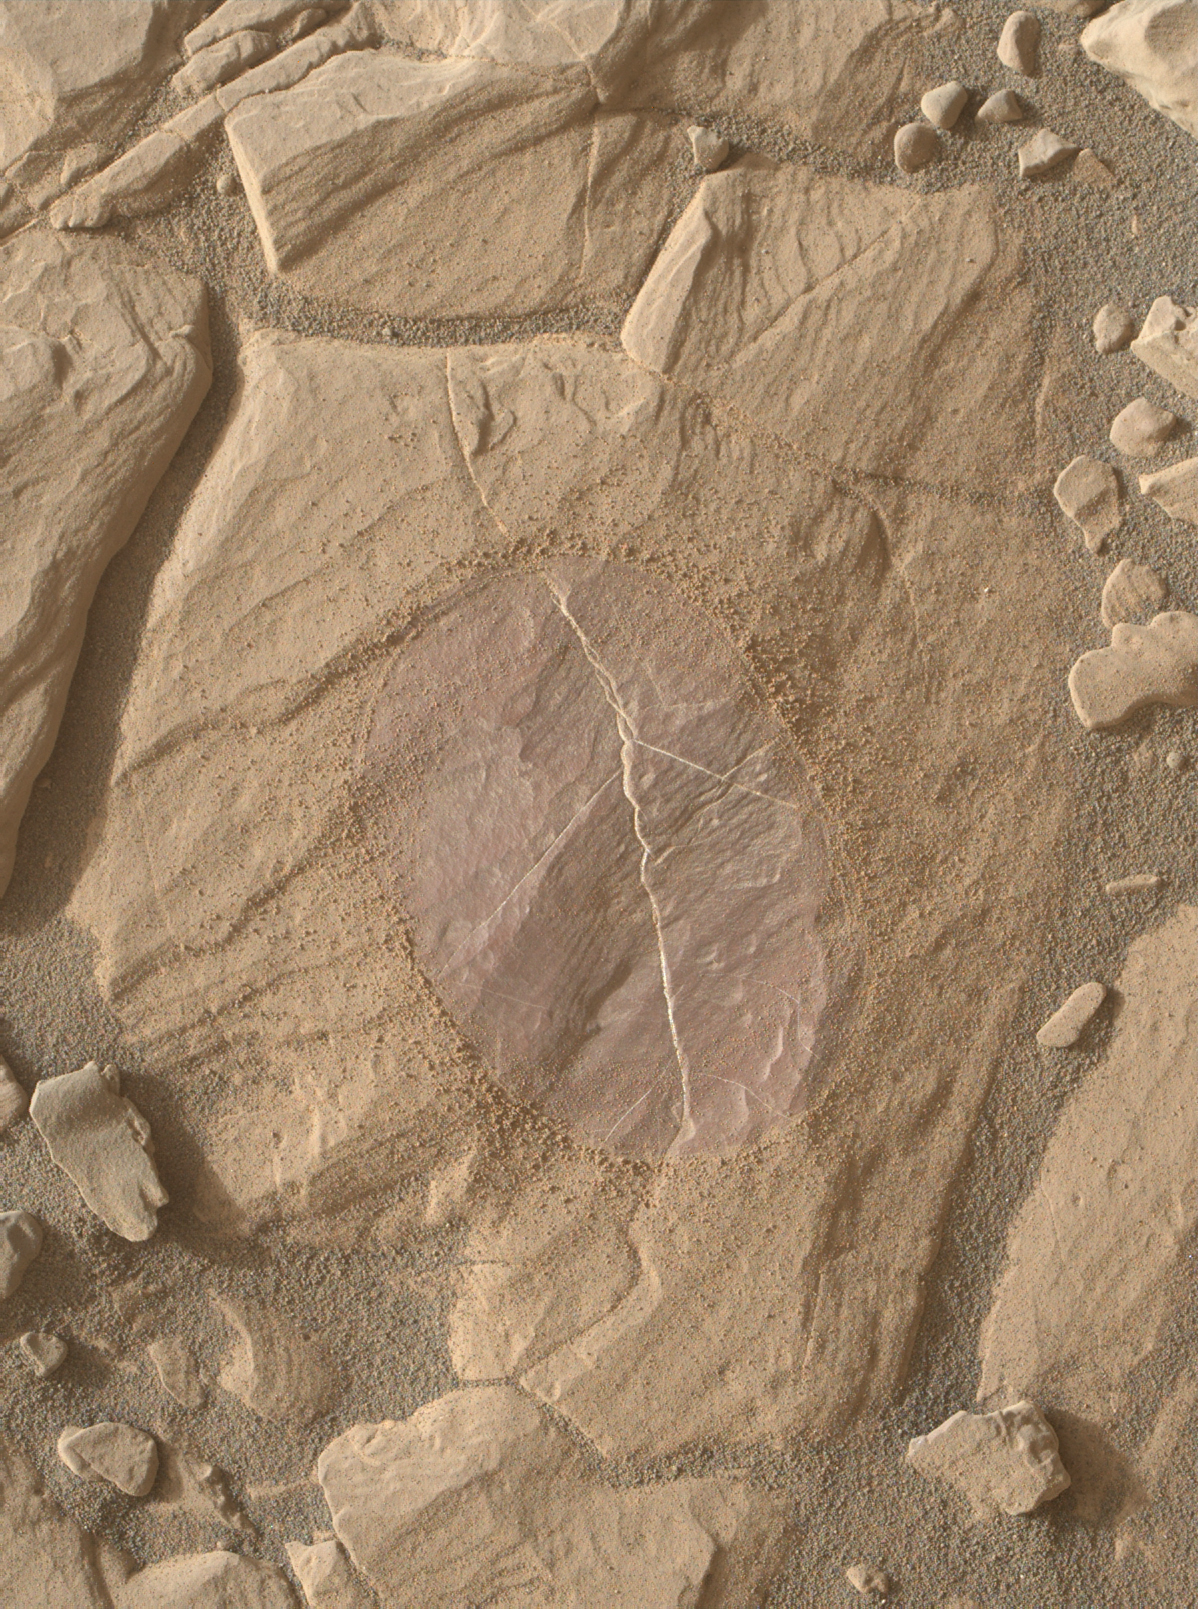 This Sept. 16, 2017, image from the Mars Hand Lens Imager (MAHLI) camera on NASA's Curiosity Mars rover shows effects of using the rover's wire-bristled Dust Removal Tool on a rock target called "Christmas Cove." Removal of dust revealed purplish rock that may contain the mineral hematite.